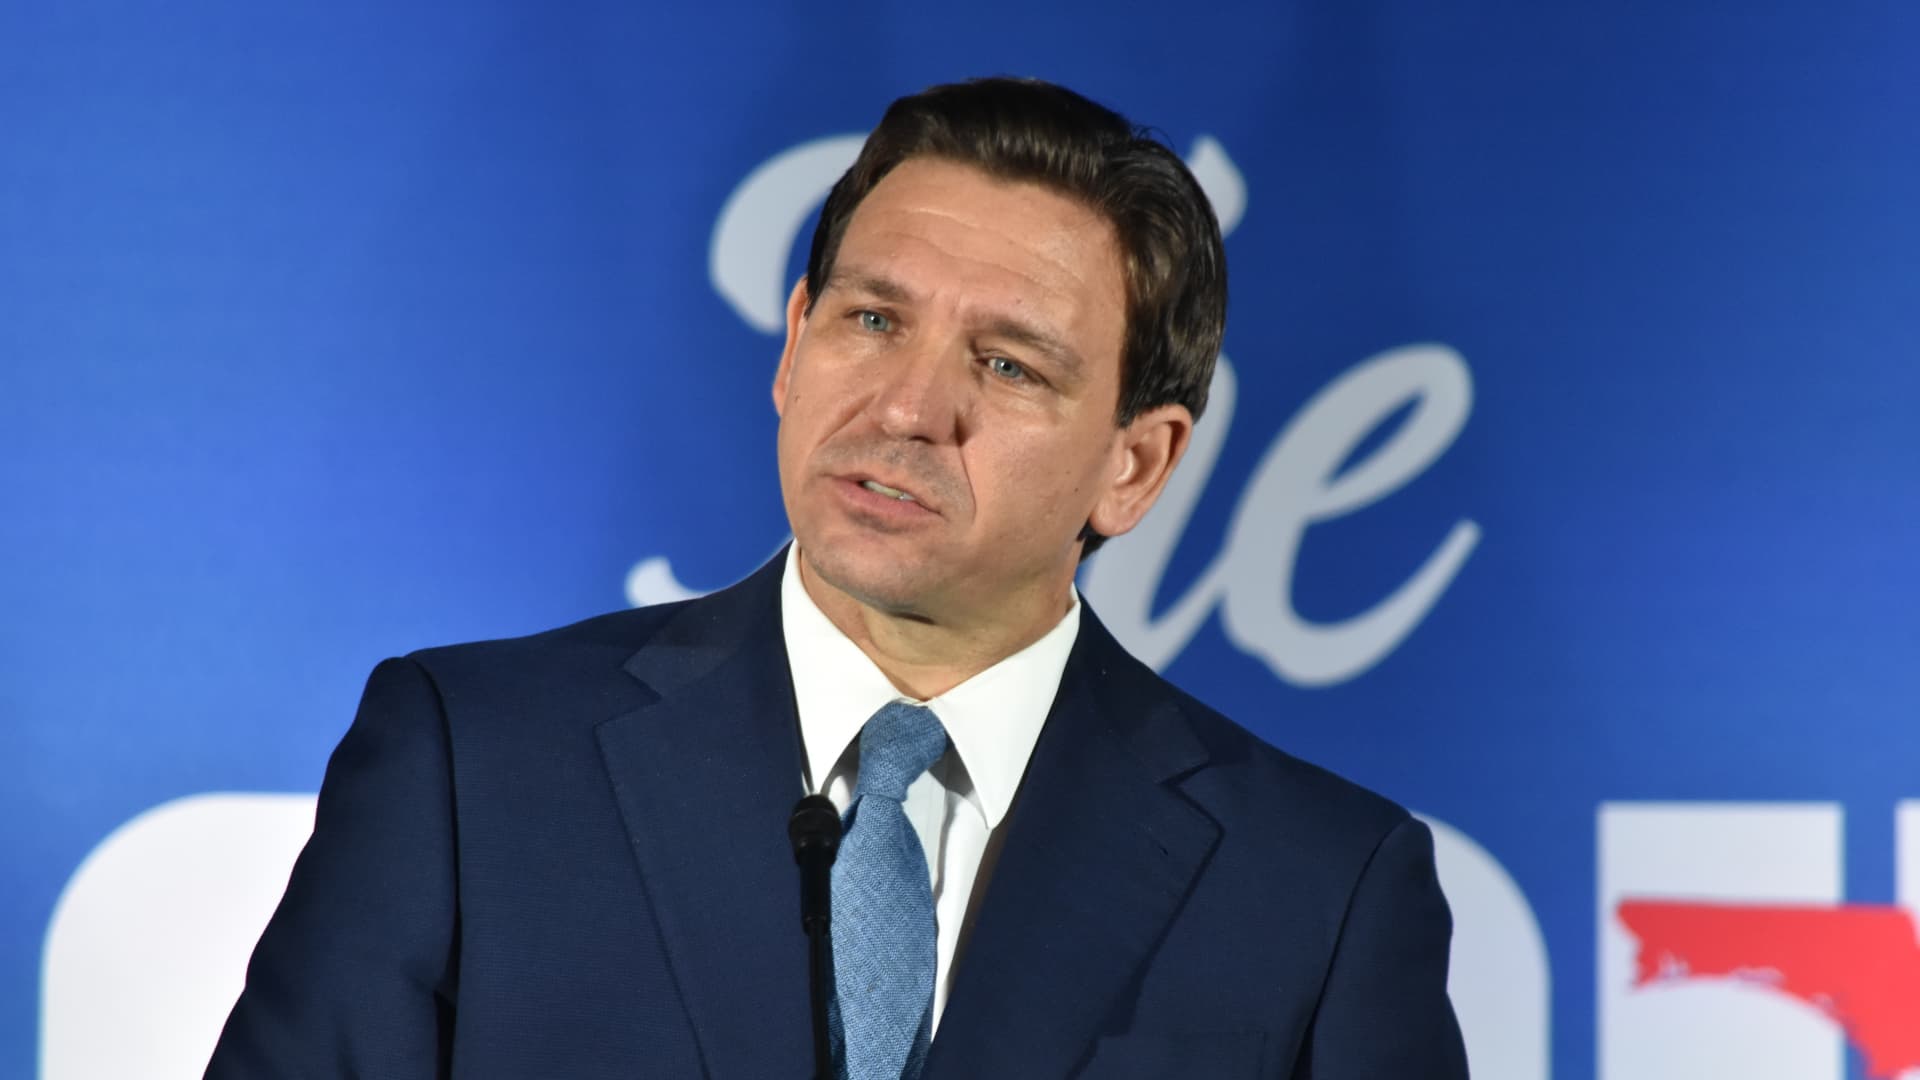 Florida Governor Ron DeSantis speaks during 'The Florida Blueprint' event on Long Island, New York, United States on April 1, 2023. Ron DeSantis made comments on the Grand Jury's indictment of Donald J. Trump, 45th President of the United States in Manhattan, New York. 